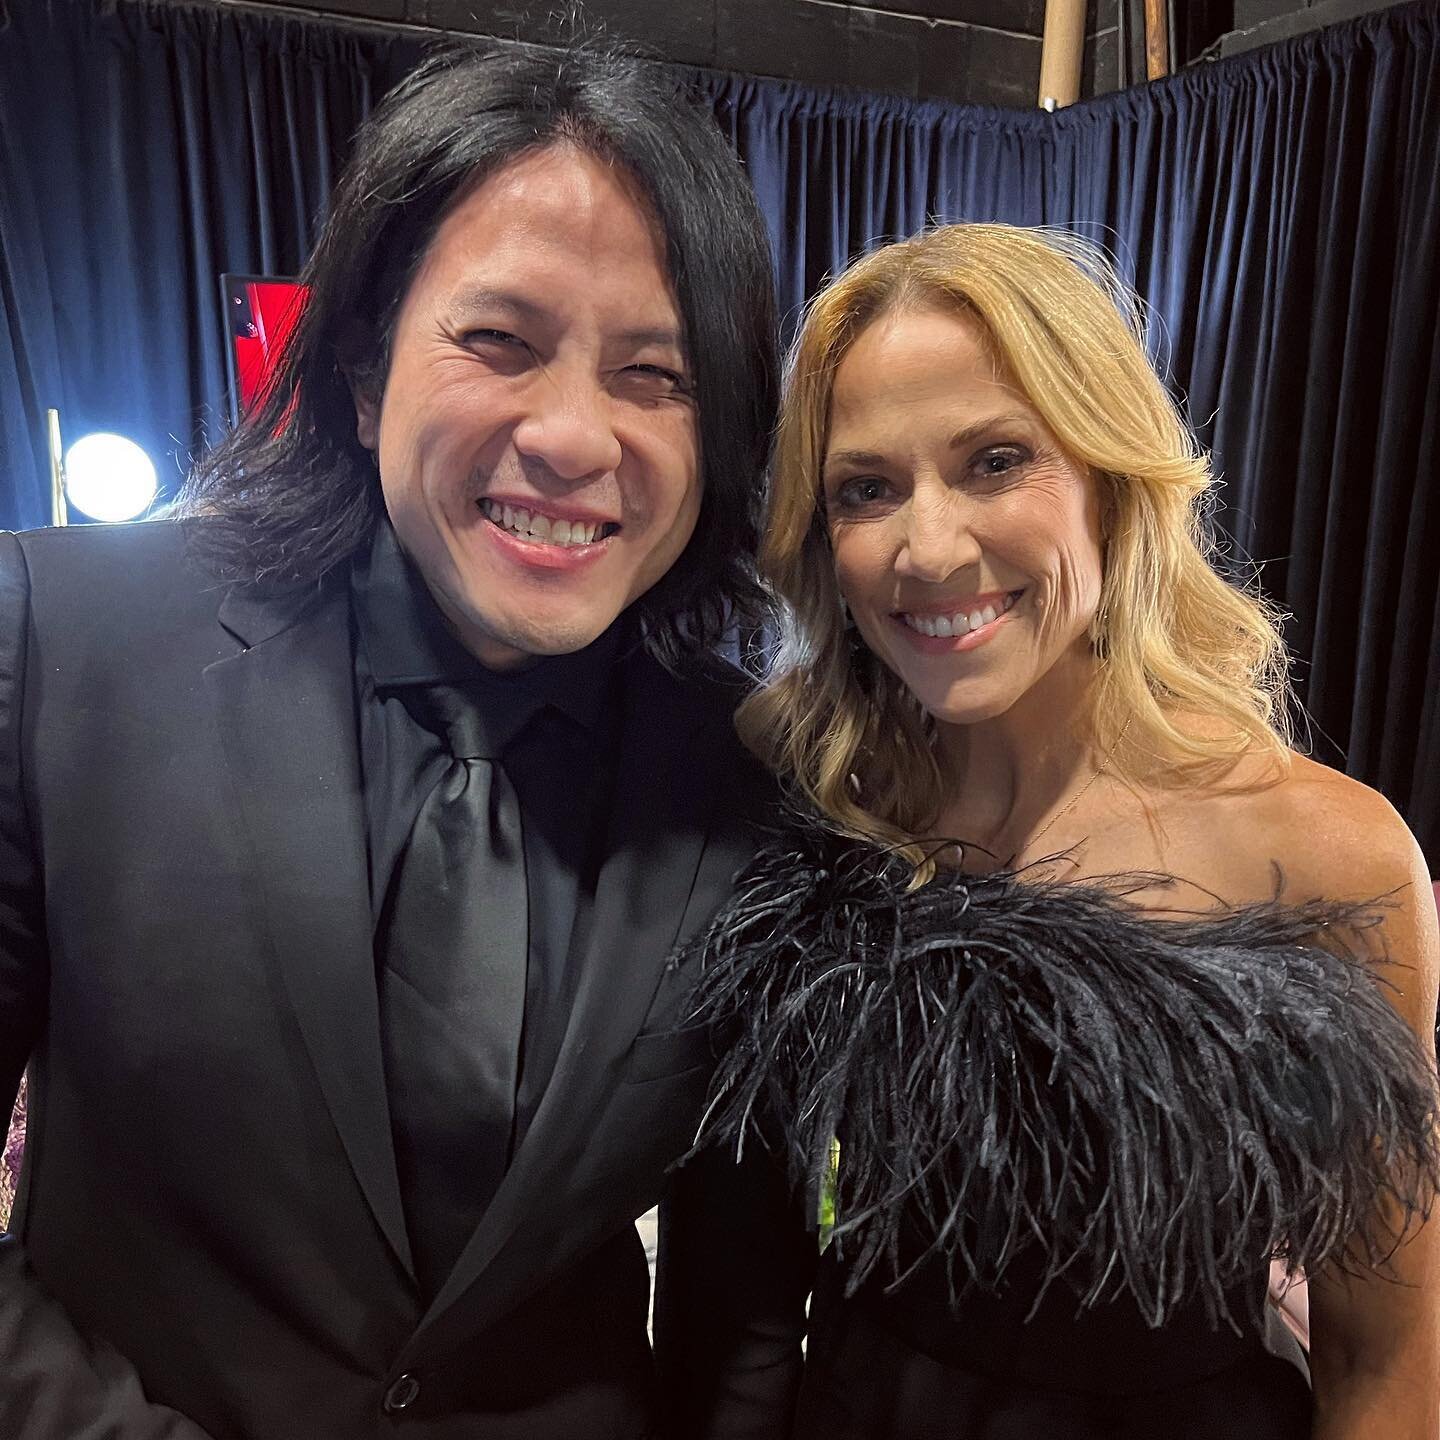 It was lovely arranging the music for @sherylcrow performance on tonight&rsquo;s @kennedycenter honors broadcast. #arranger #music #sherylcrow  #amygrant #kennedycenter #cbs